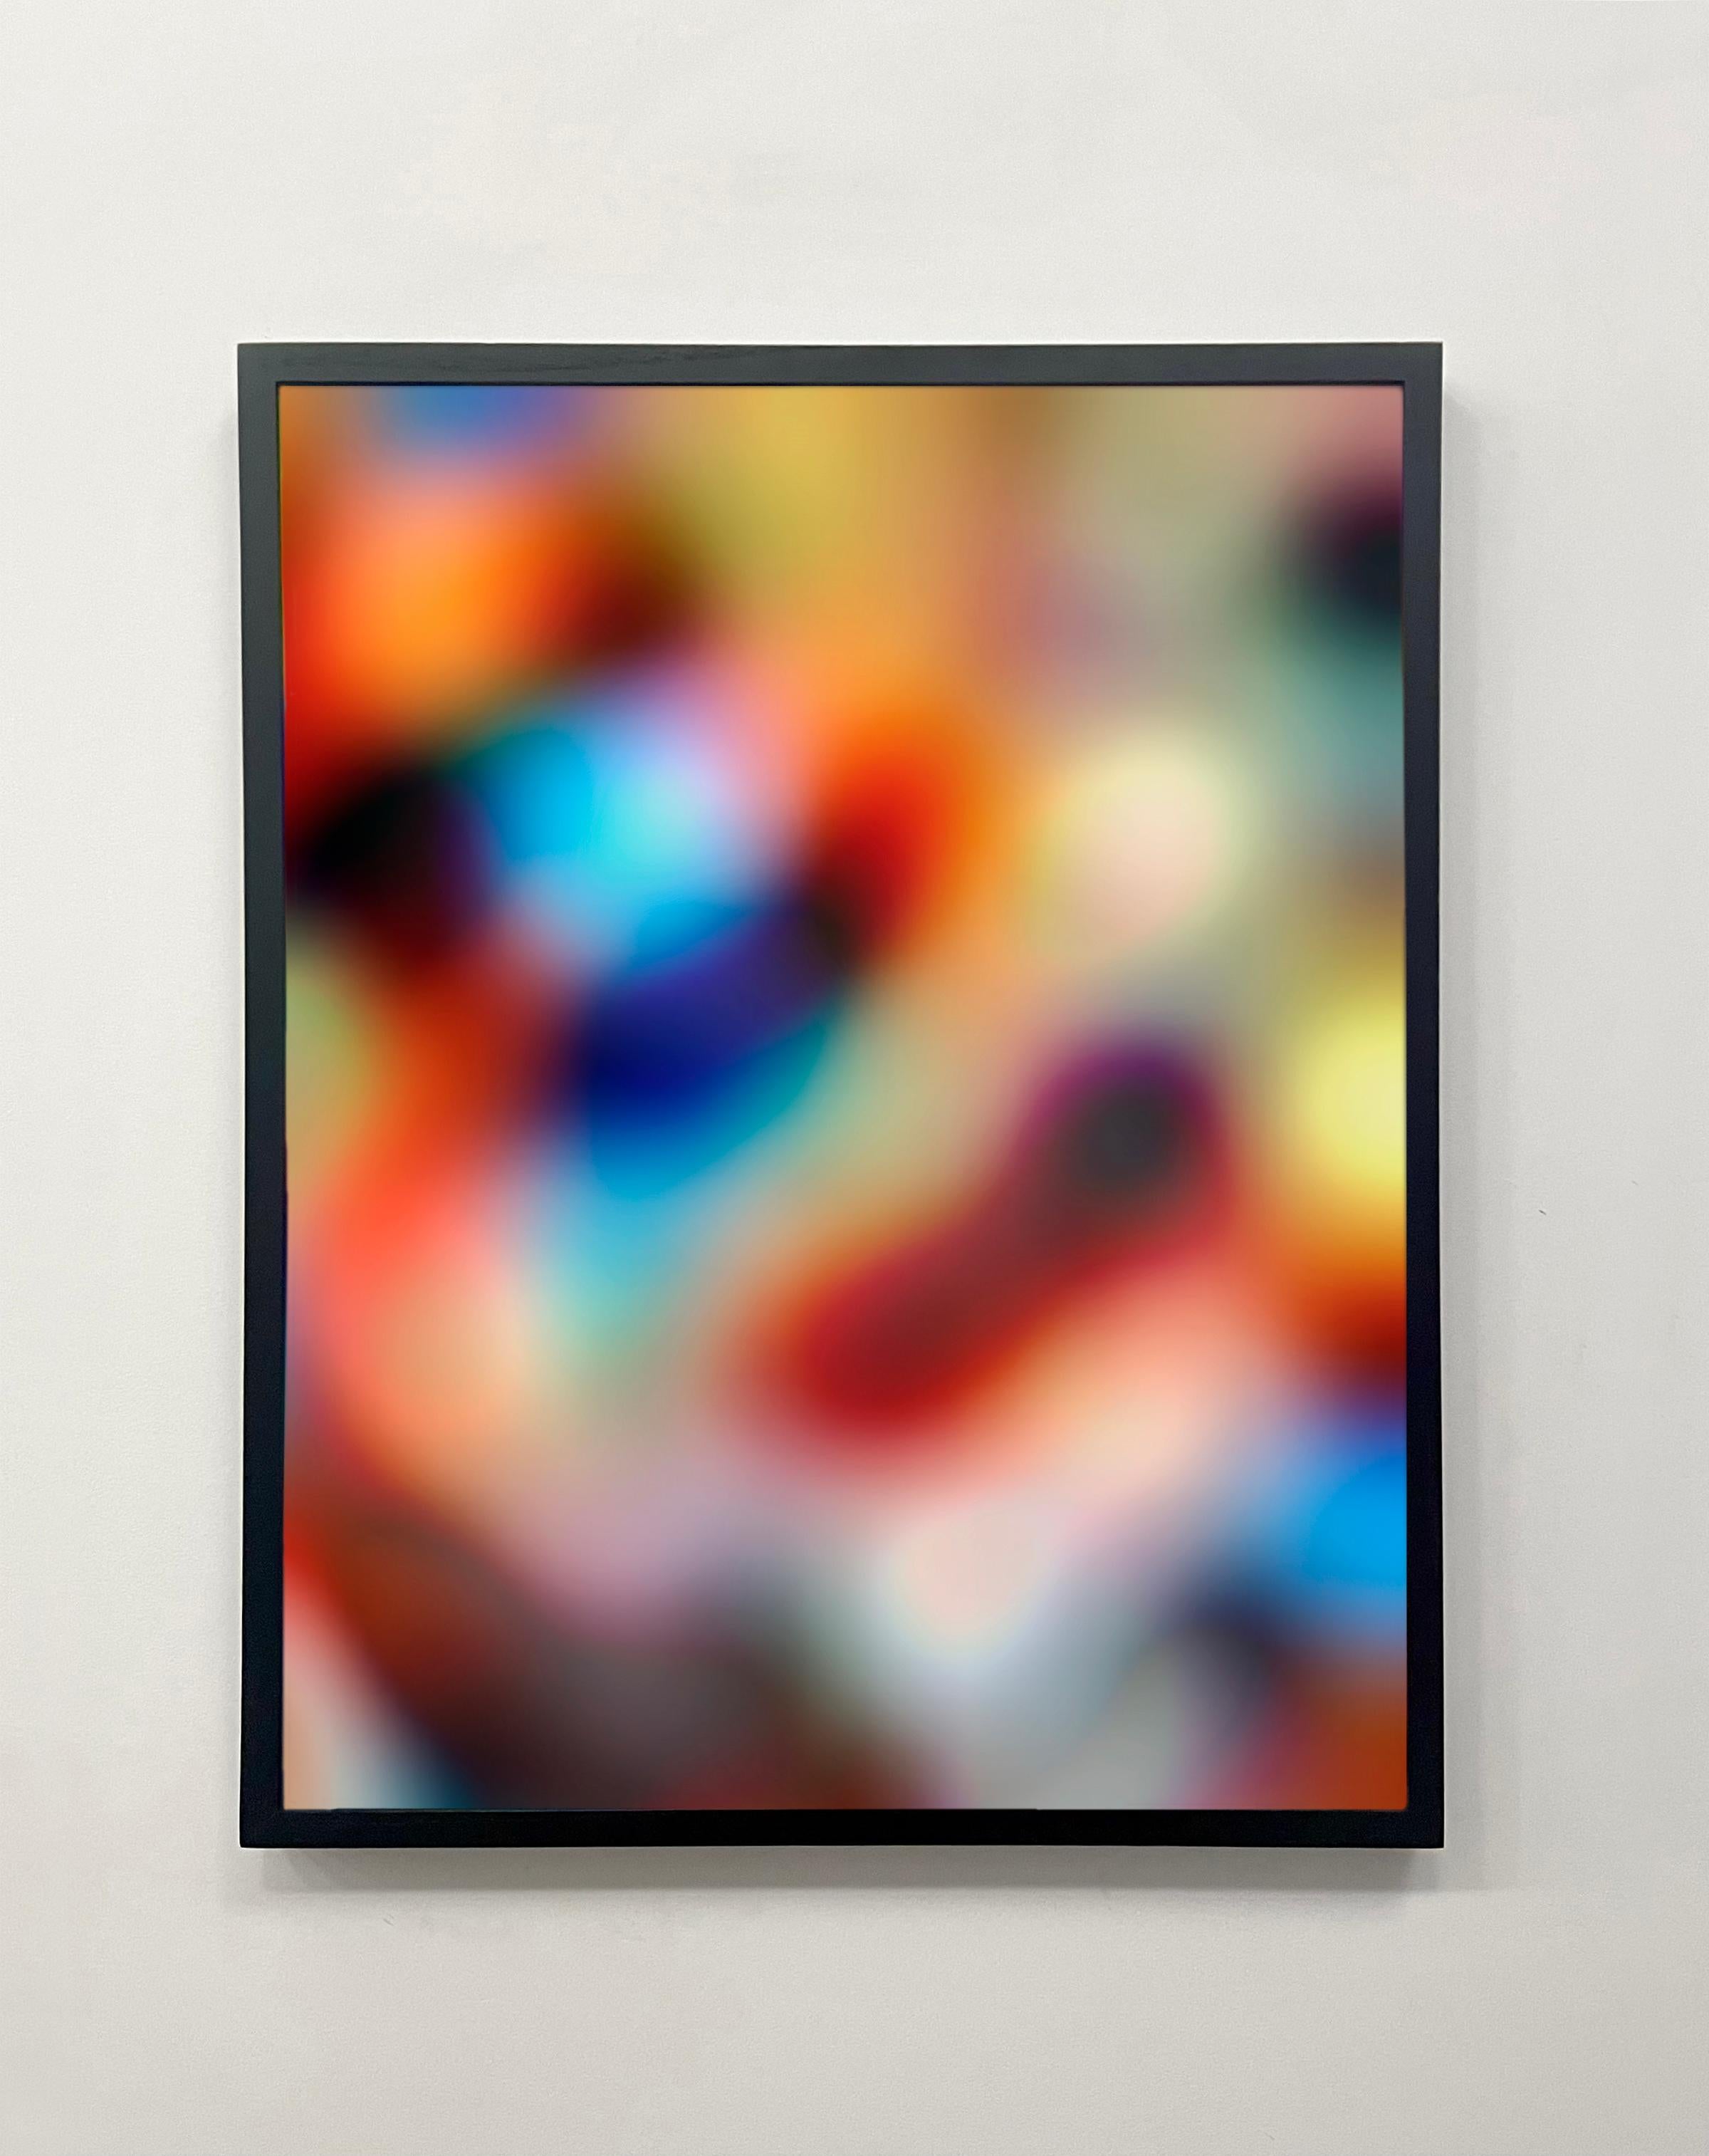 General Information:
Hypertext- Movement #1, 2022
30 x 24 Inch Archival Pigment Print Mounted to Dibond
Black Wooden Frame
Editioned 1/5
Produced on Hahnemühle Fine Art Paper, Mounted to Dibond, and displayed borderless in a black, wooden